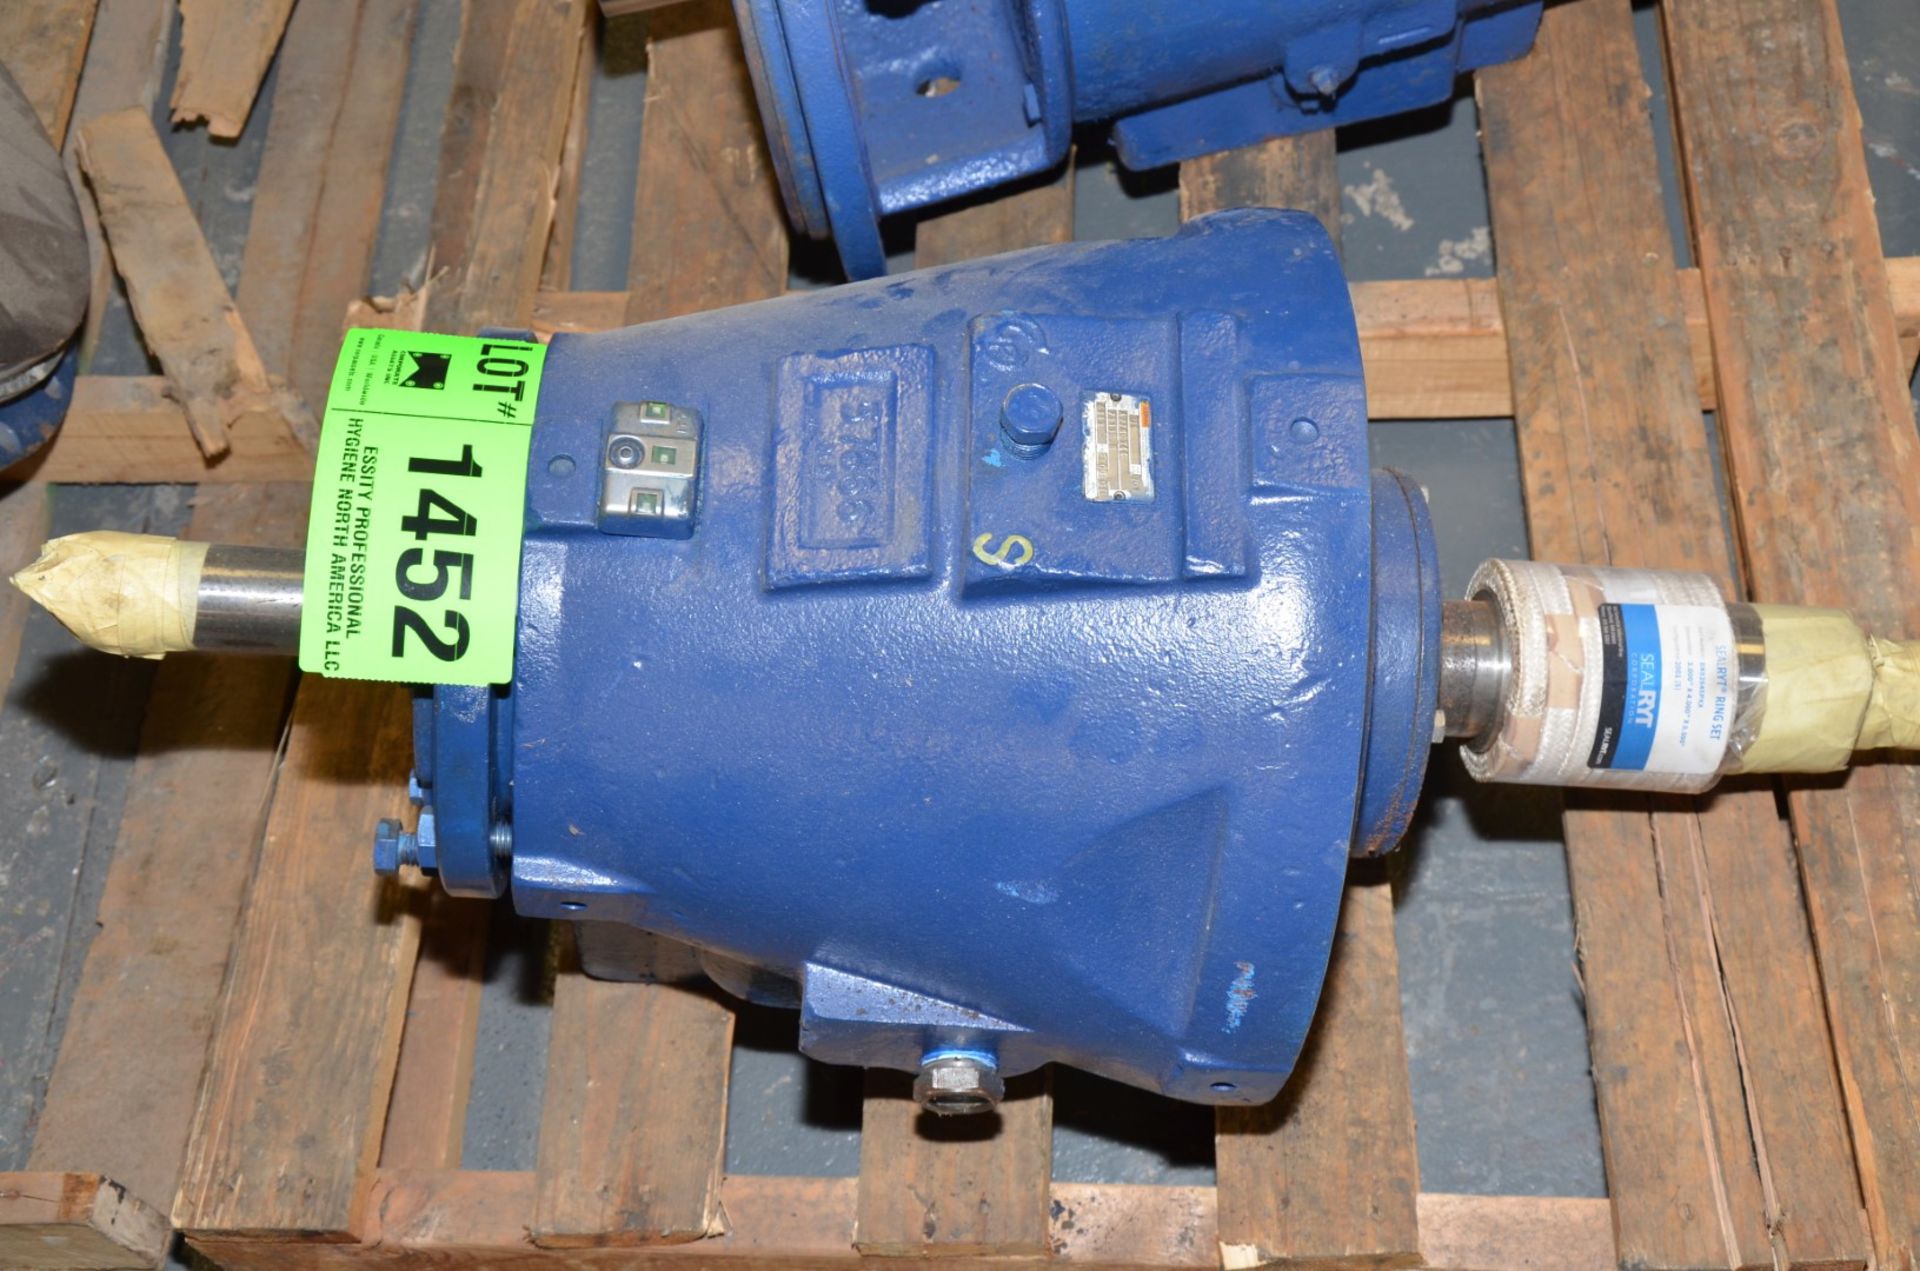 GOULDS 6313D PUMP ROTARY ASSY [RIGGING FEE FOR LOT #1452 - $25 USD PLUS APPLICABLE TAXES]